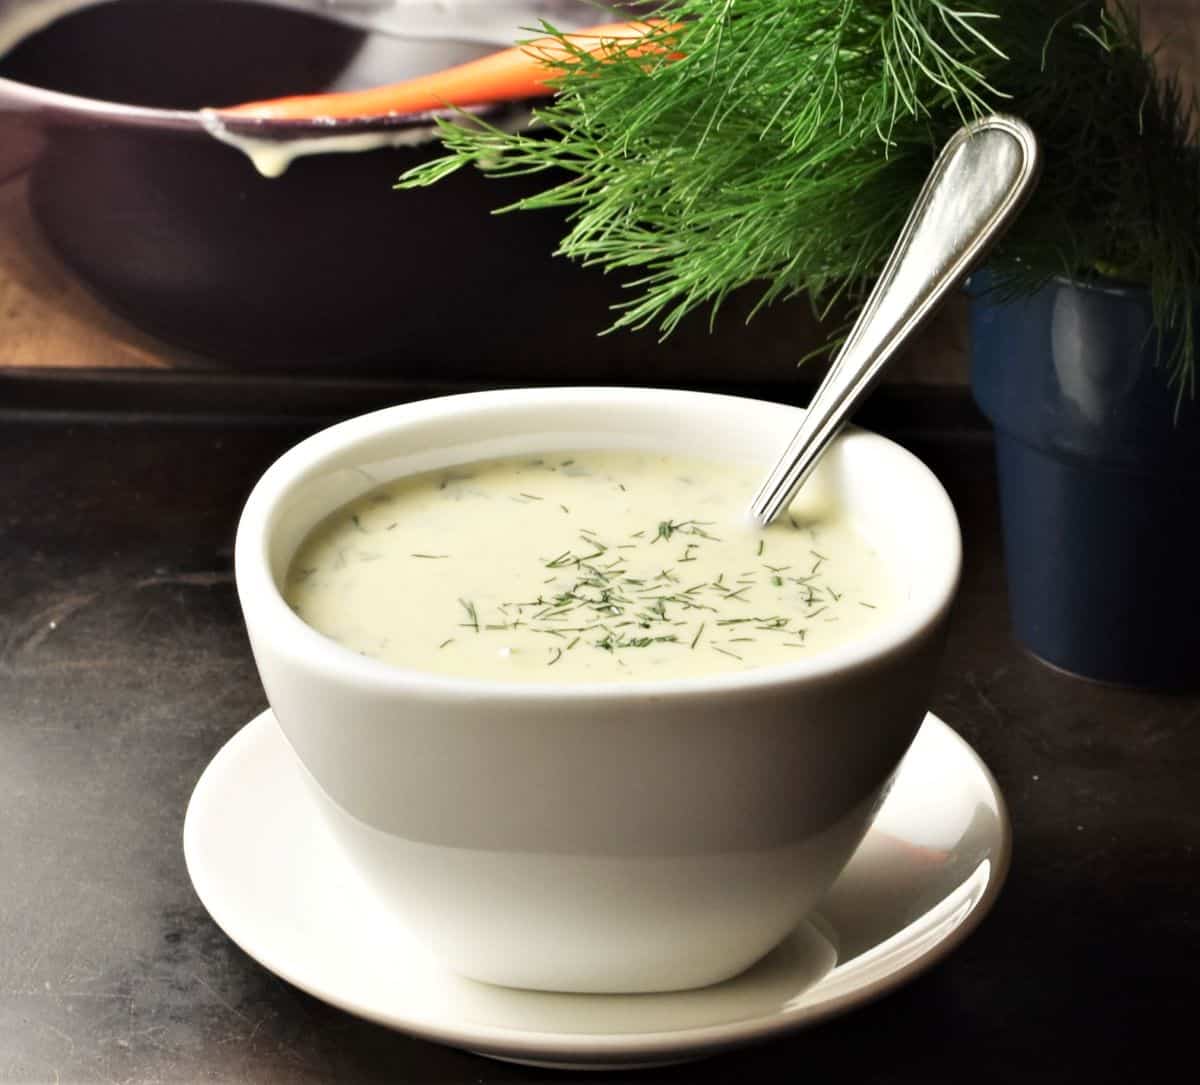 Side view of creamy dill sauce in white bowl with spoon and fresh dill in background.